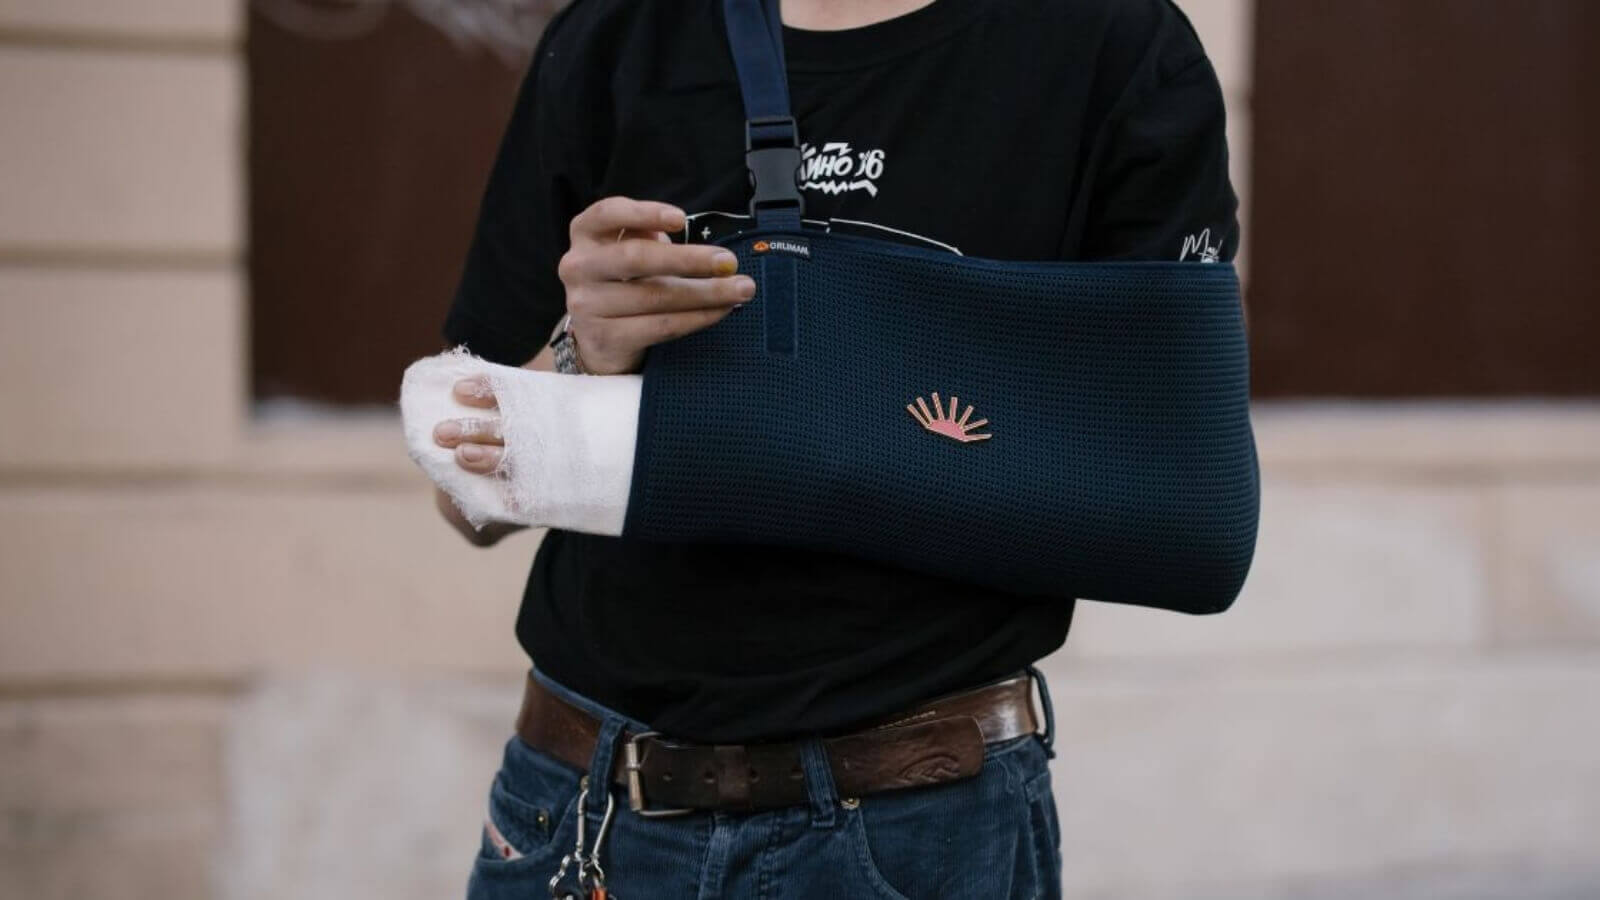 Person with arm in cast